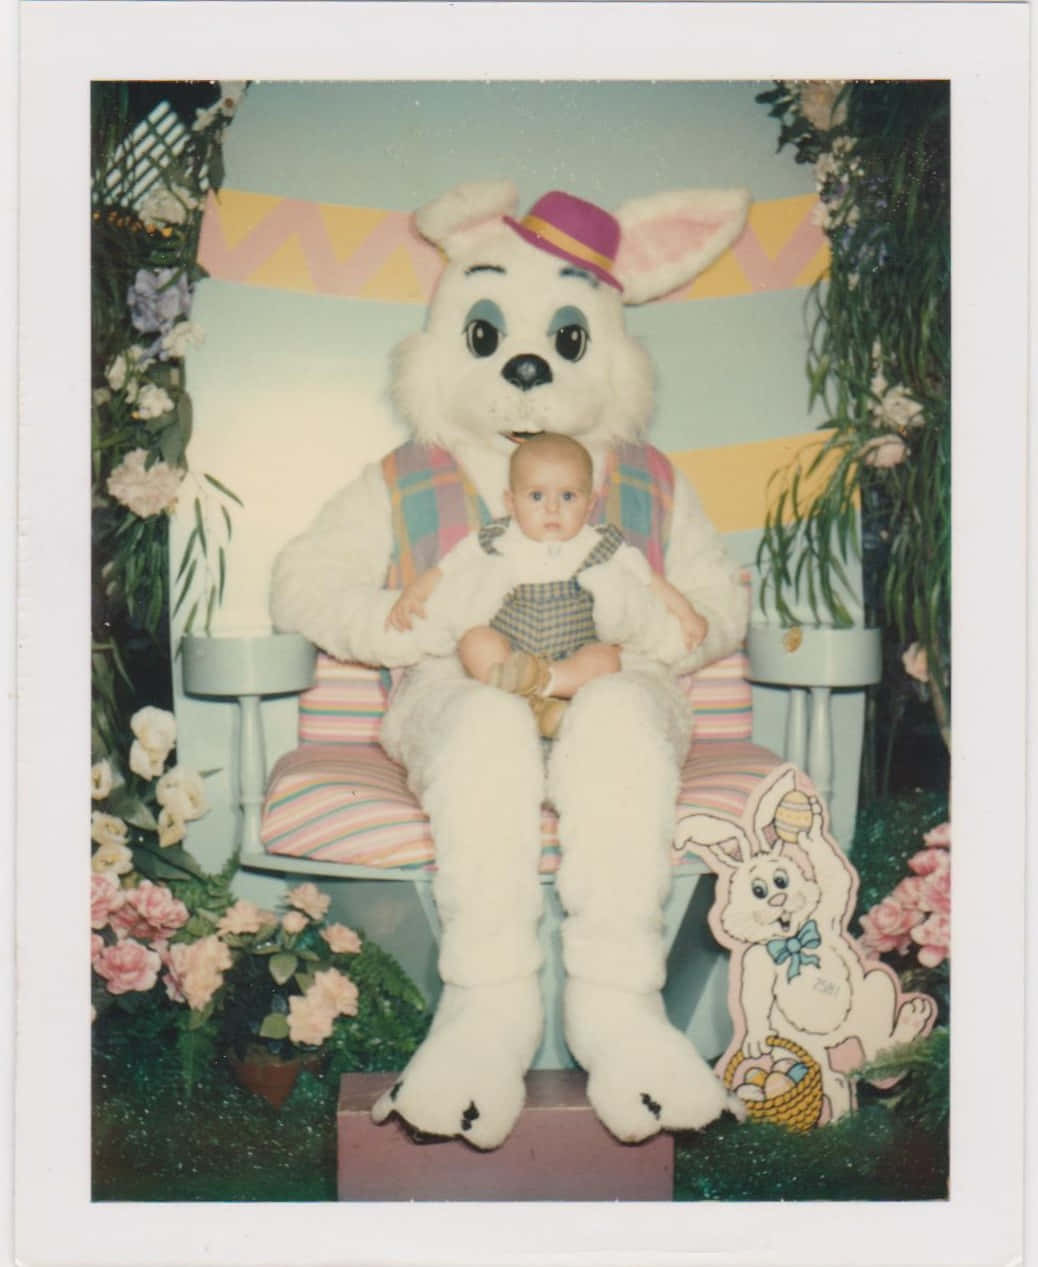 "Not your average Easter bunny!"